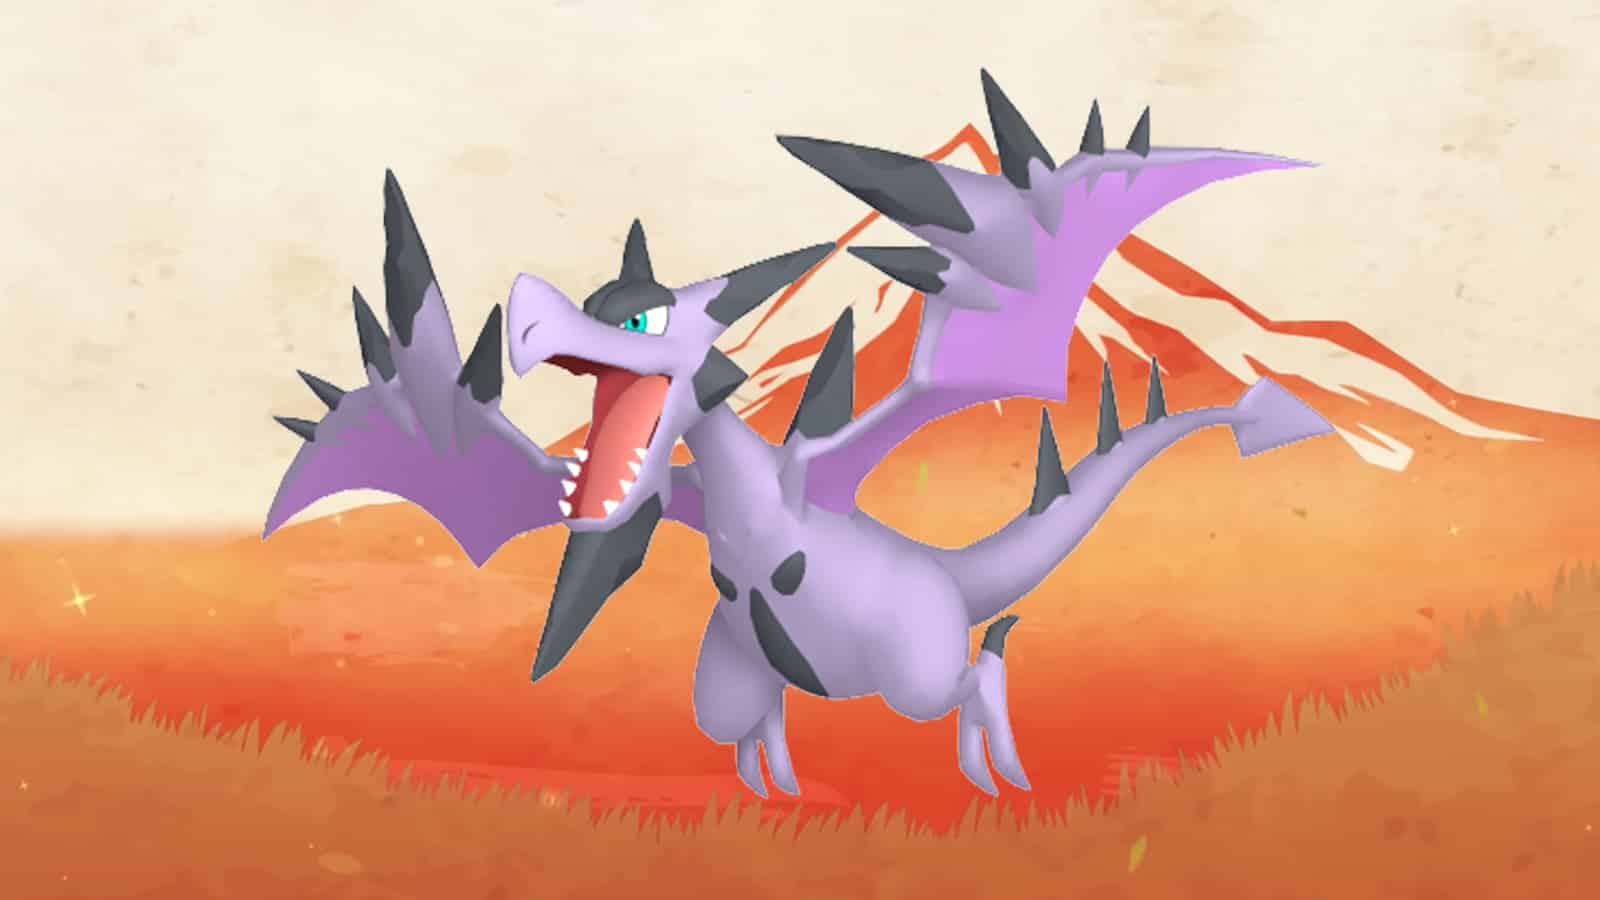 Mega Aerodactyl appearing in the Pokemon Go Mountains of Power event